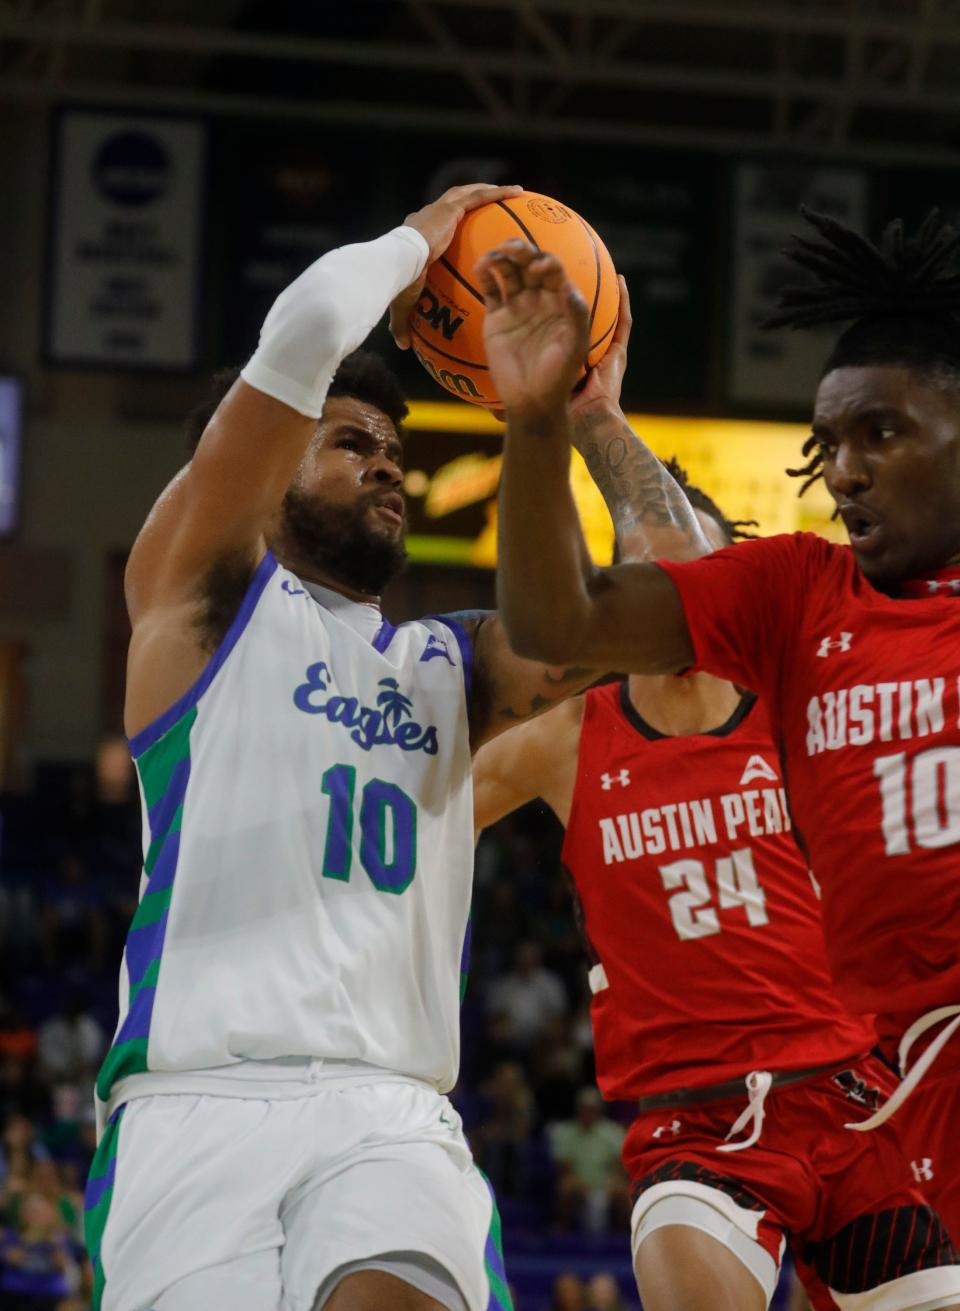 The Florida Gulf Coast University men's basketball team defeated visiting Austin Peay in their final game of the regular season 89-71 Friday, Feb. 24, 2023.